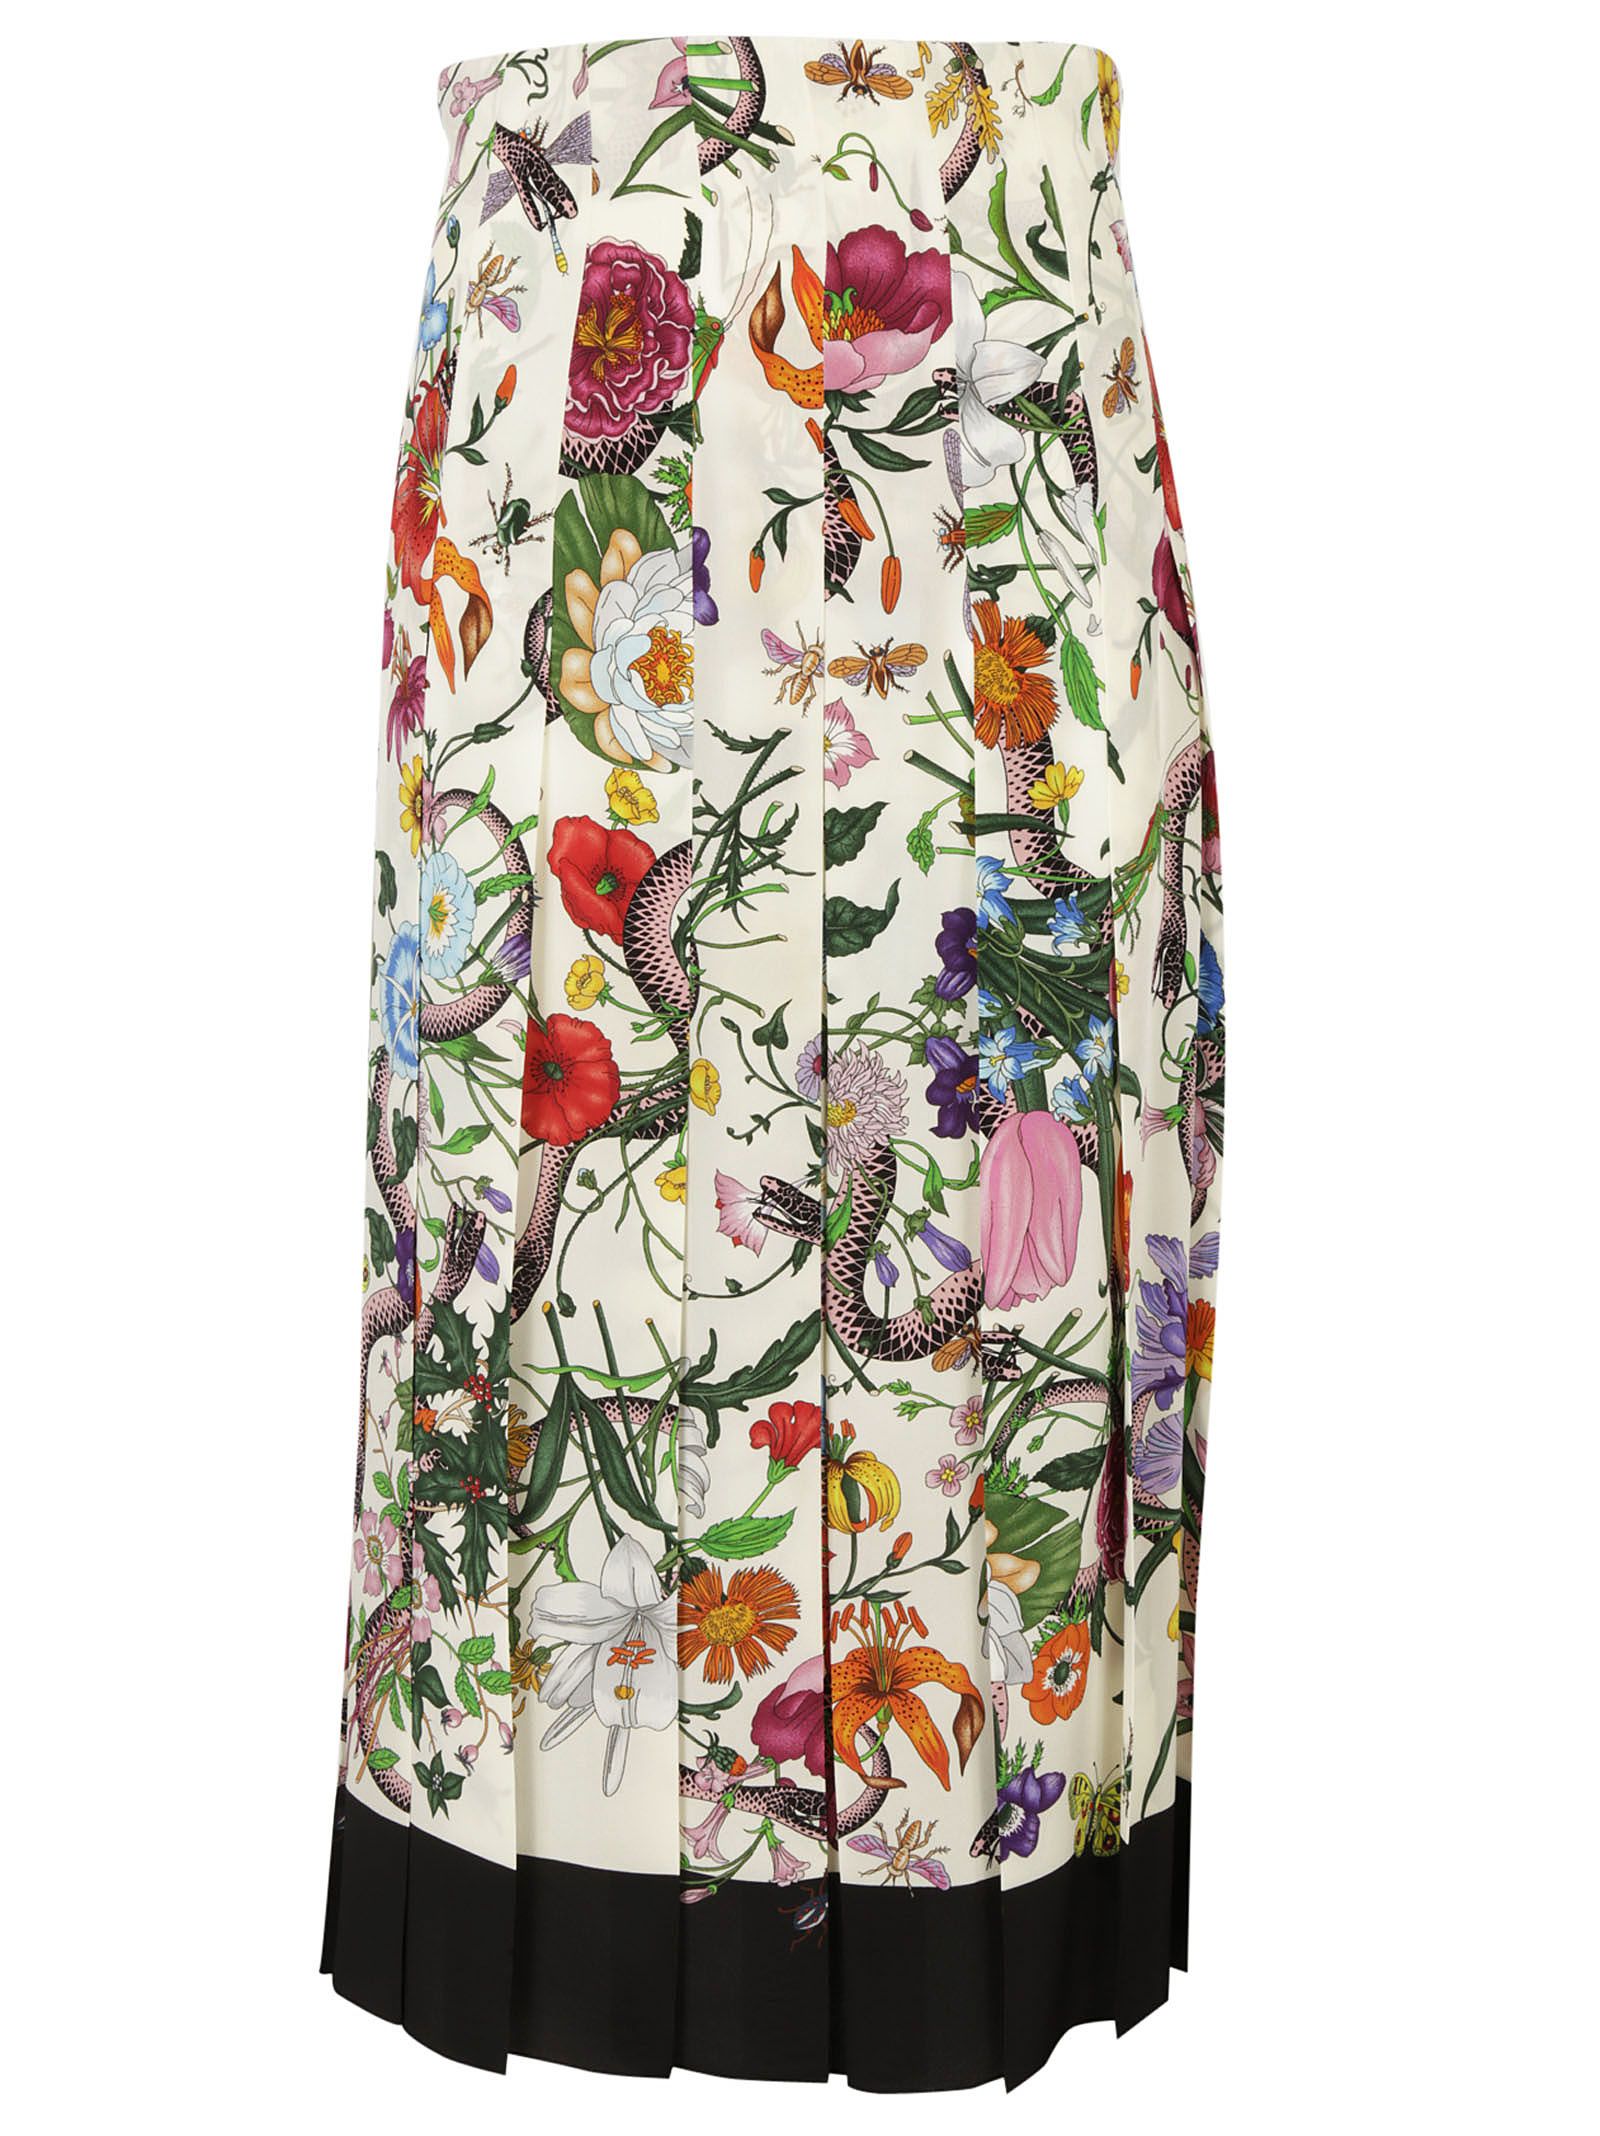 Gucci - Gucci Floral Print Skirt - White, Women's Skirts | Italist